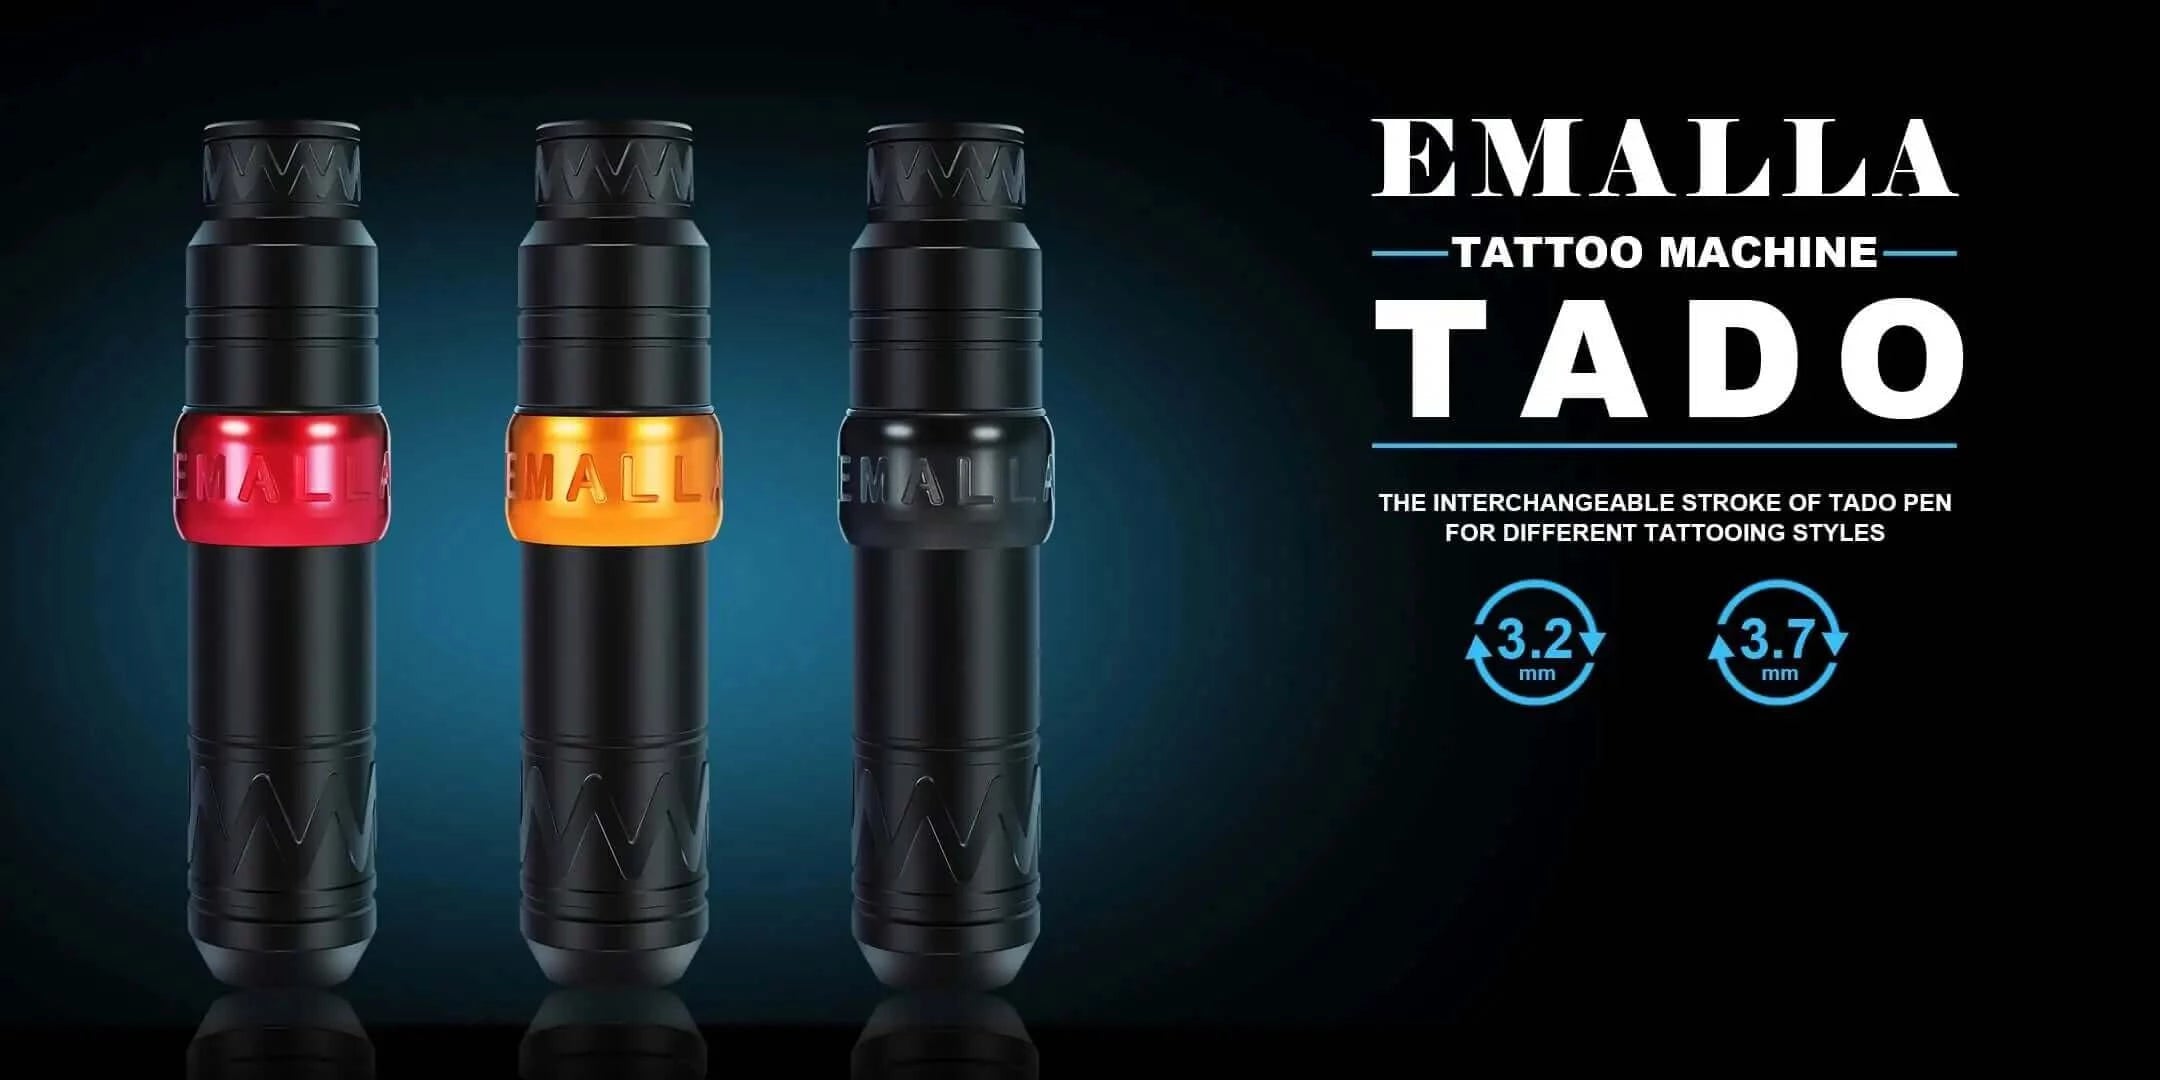 EMALLA TADO Tattoo Pen Rotary Machine with interchangeable stroke for different tattooing styles